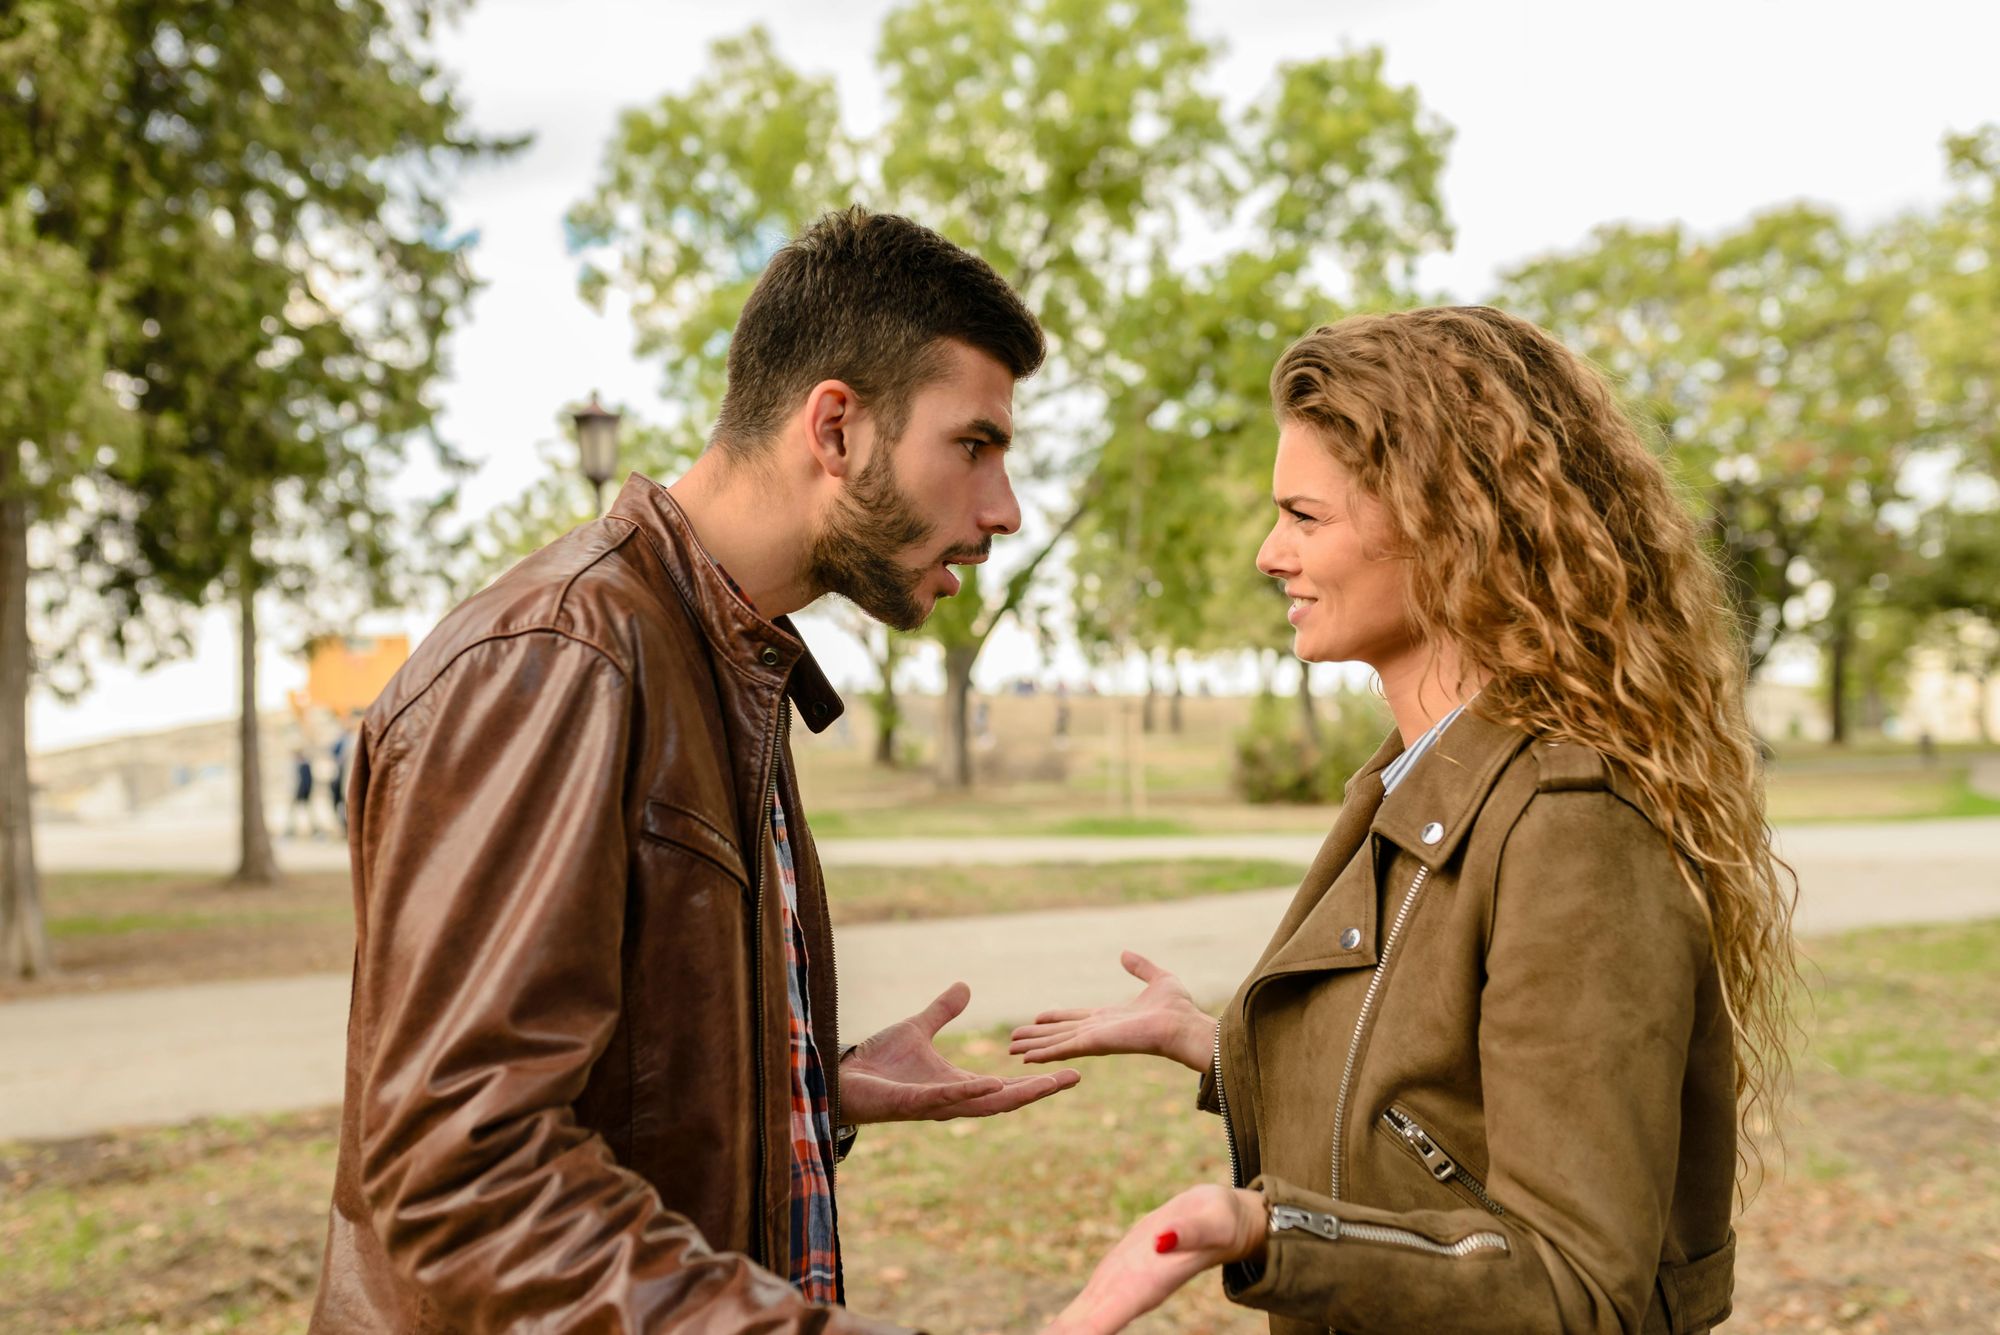 Two caucasian persons facing each other and arguing. One has short dark hair and facial hair with plaid button down and leather jacket. Other has long curly hair with striped button down and brown suede jacket.